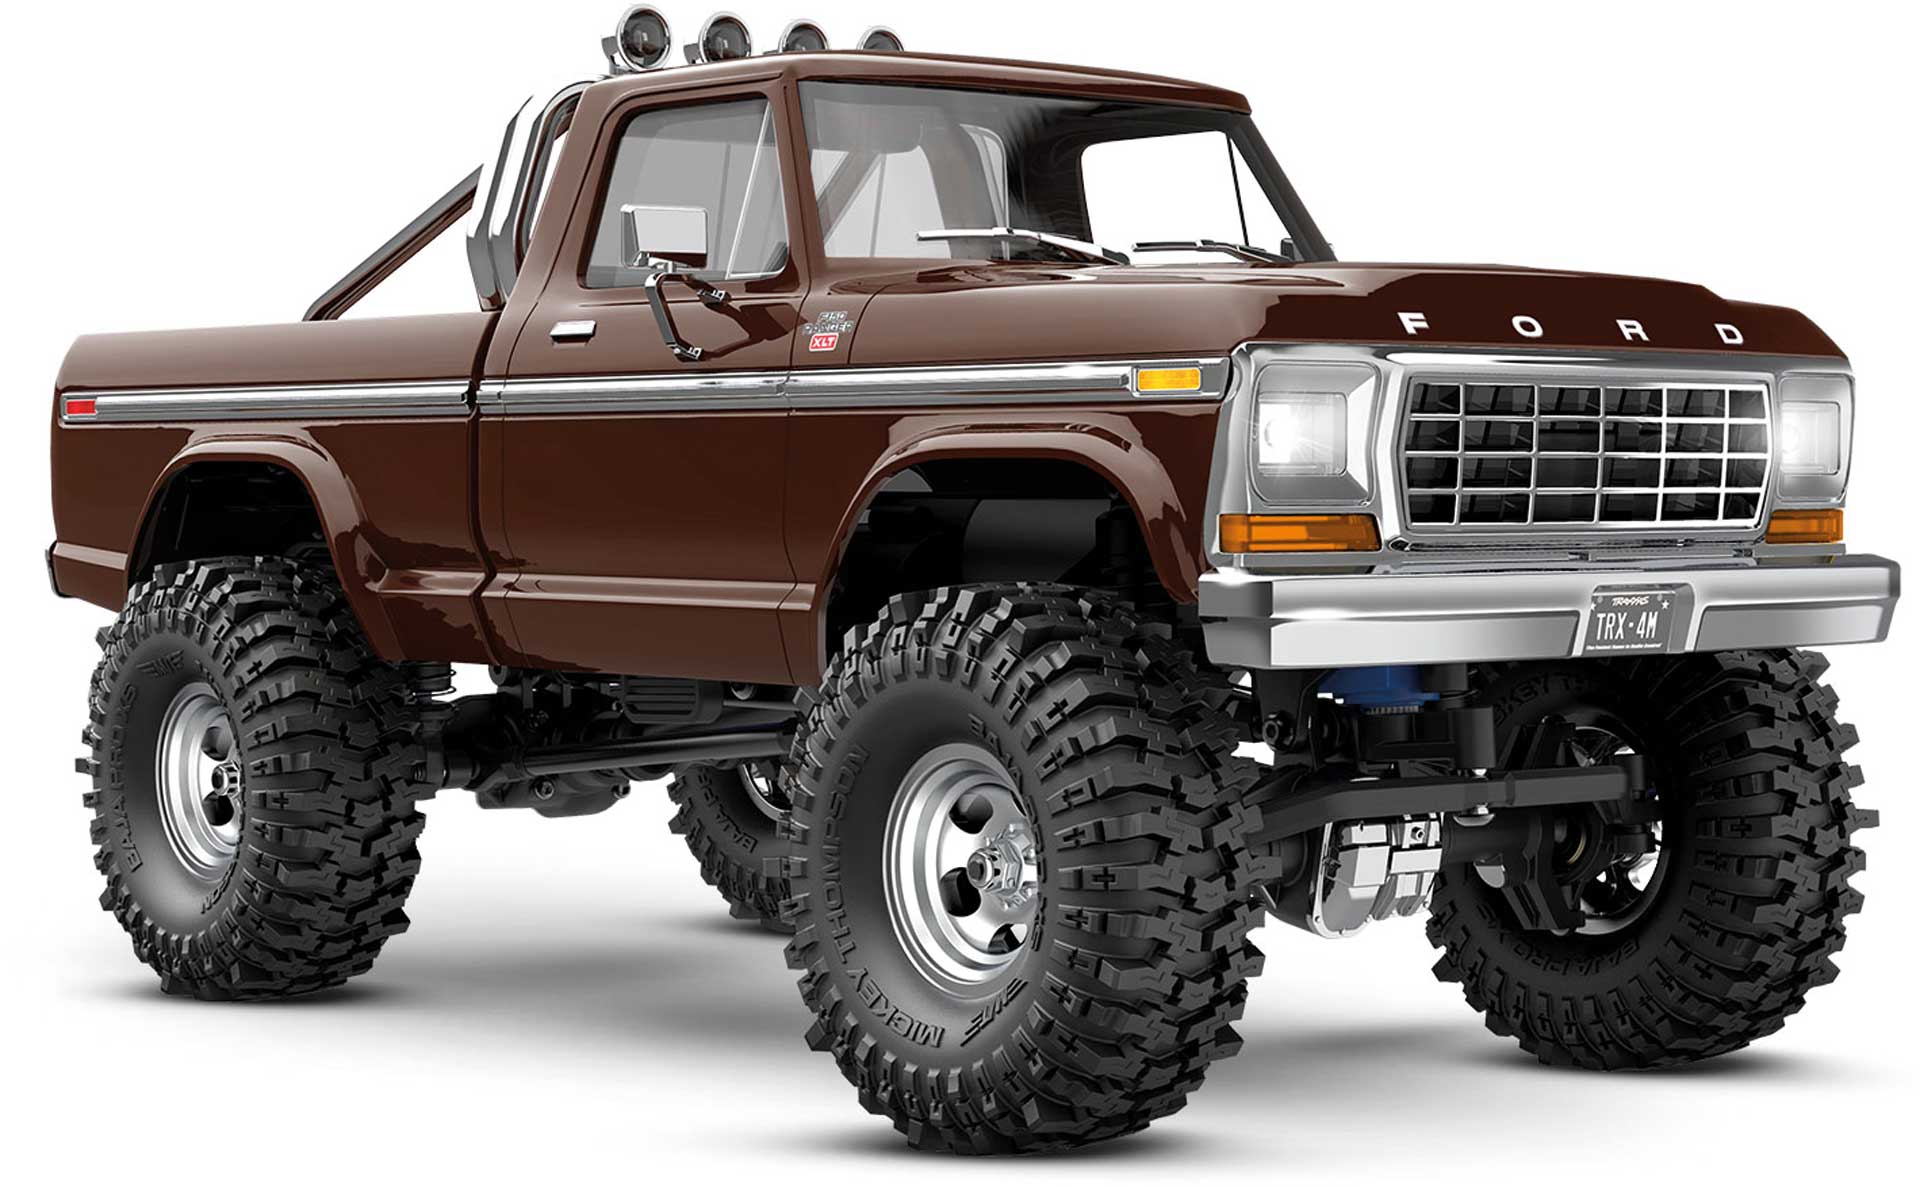 TRAXXAS TRX-4M FORD F150 4X4 LIFTED MARRON 1/18 CRAWLER RTR BRUSHED, AVEC ACCU ET CHARGEUR USB